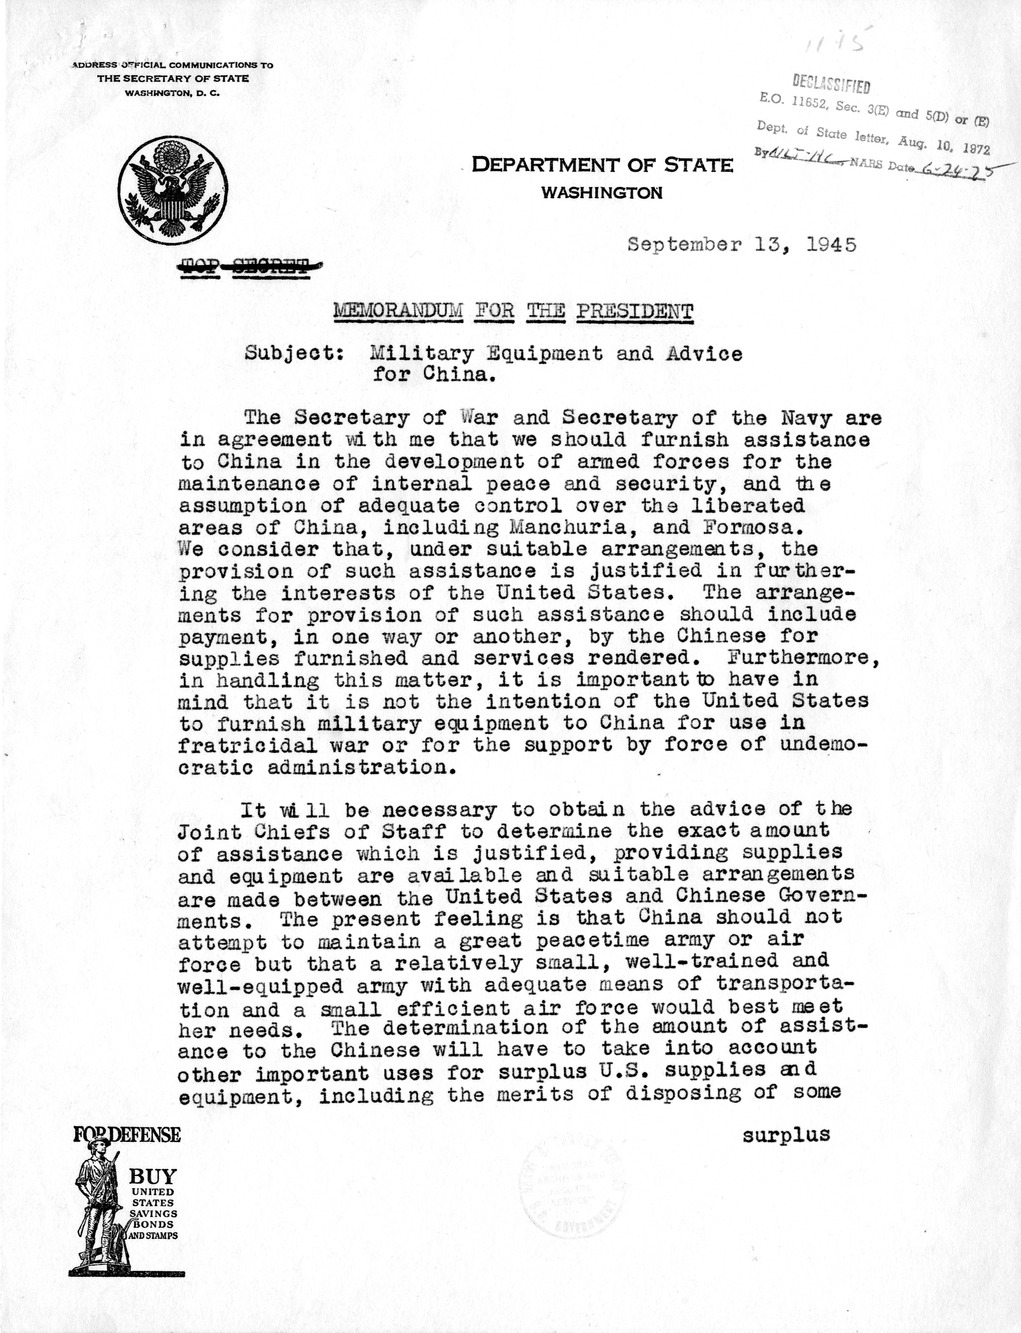 Memorandum from Acting Secretary of State Dean Acheson to President Harry S. Truman, with Related Material